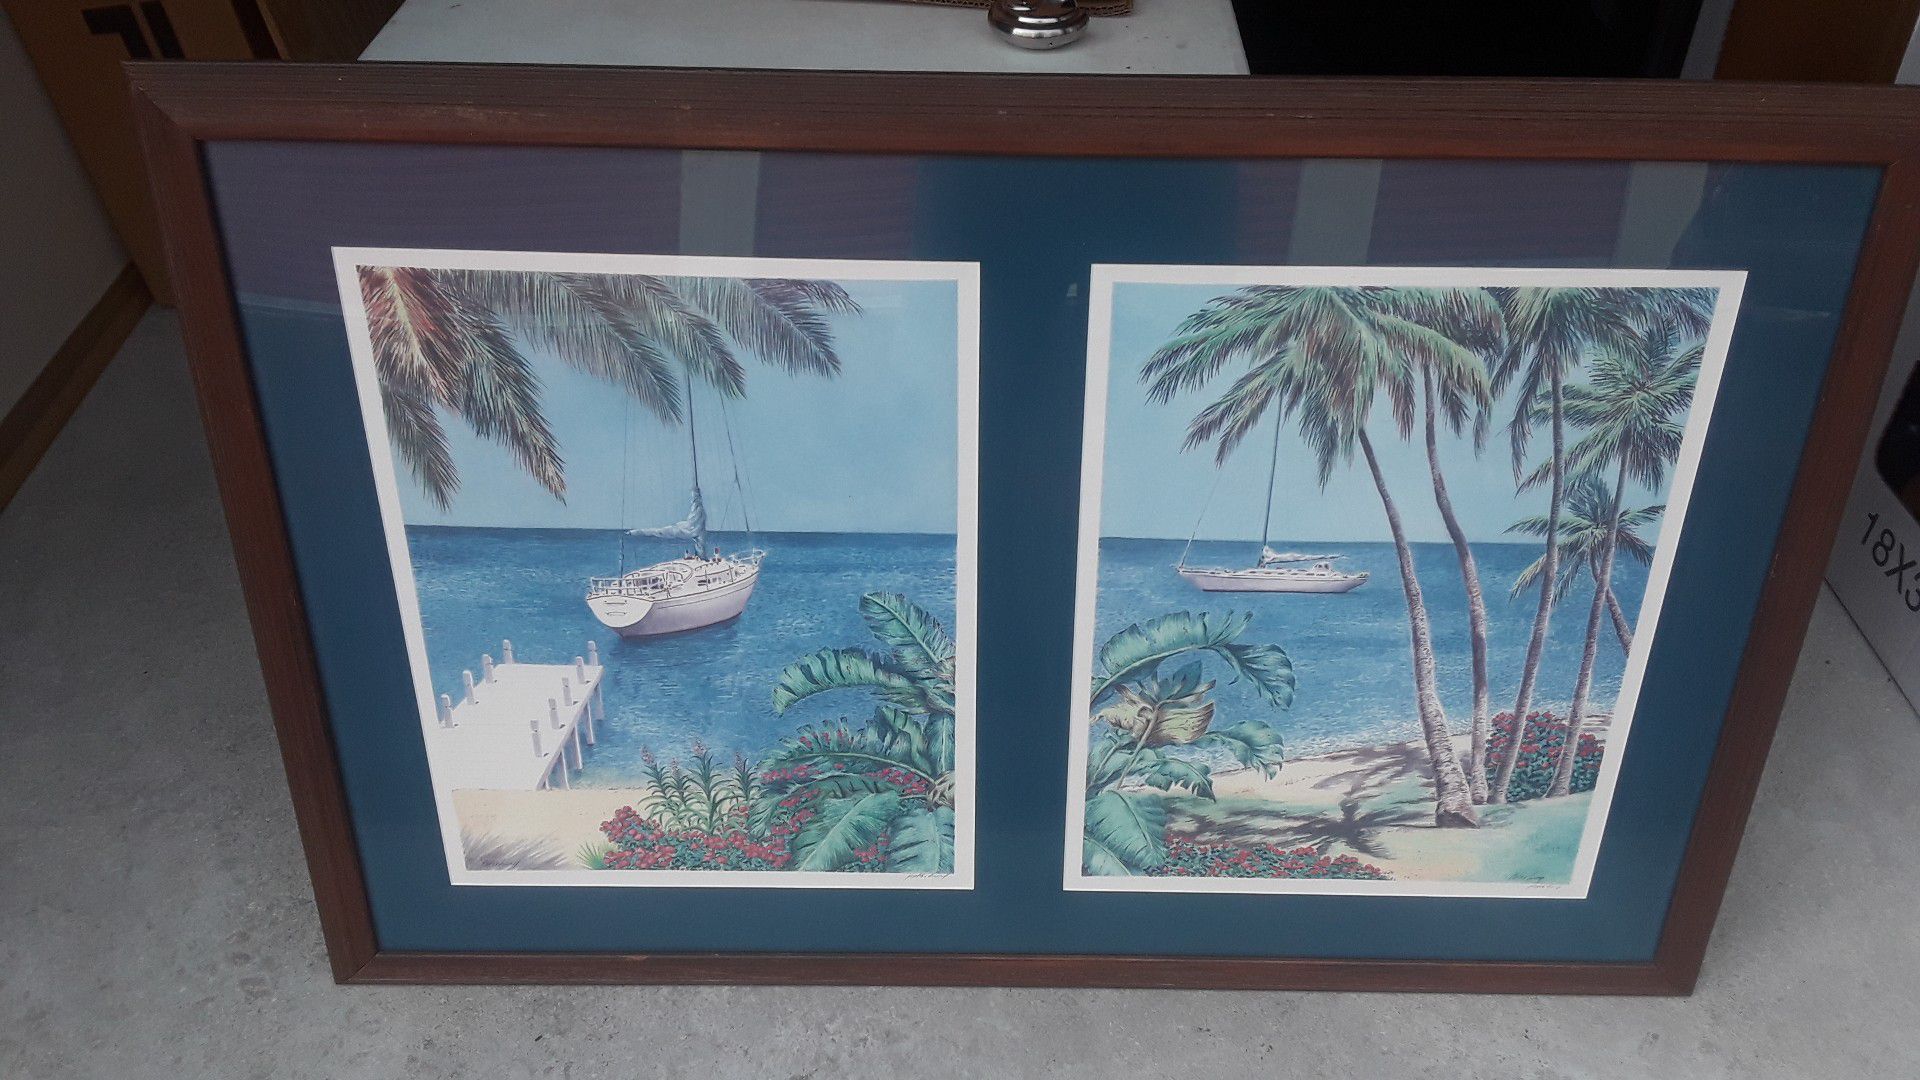 Sailboat beach scenes. Framed and matted artwork.